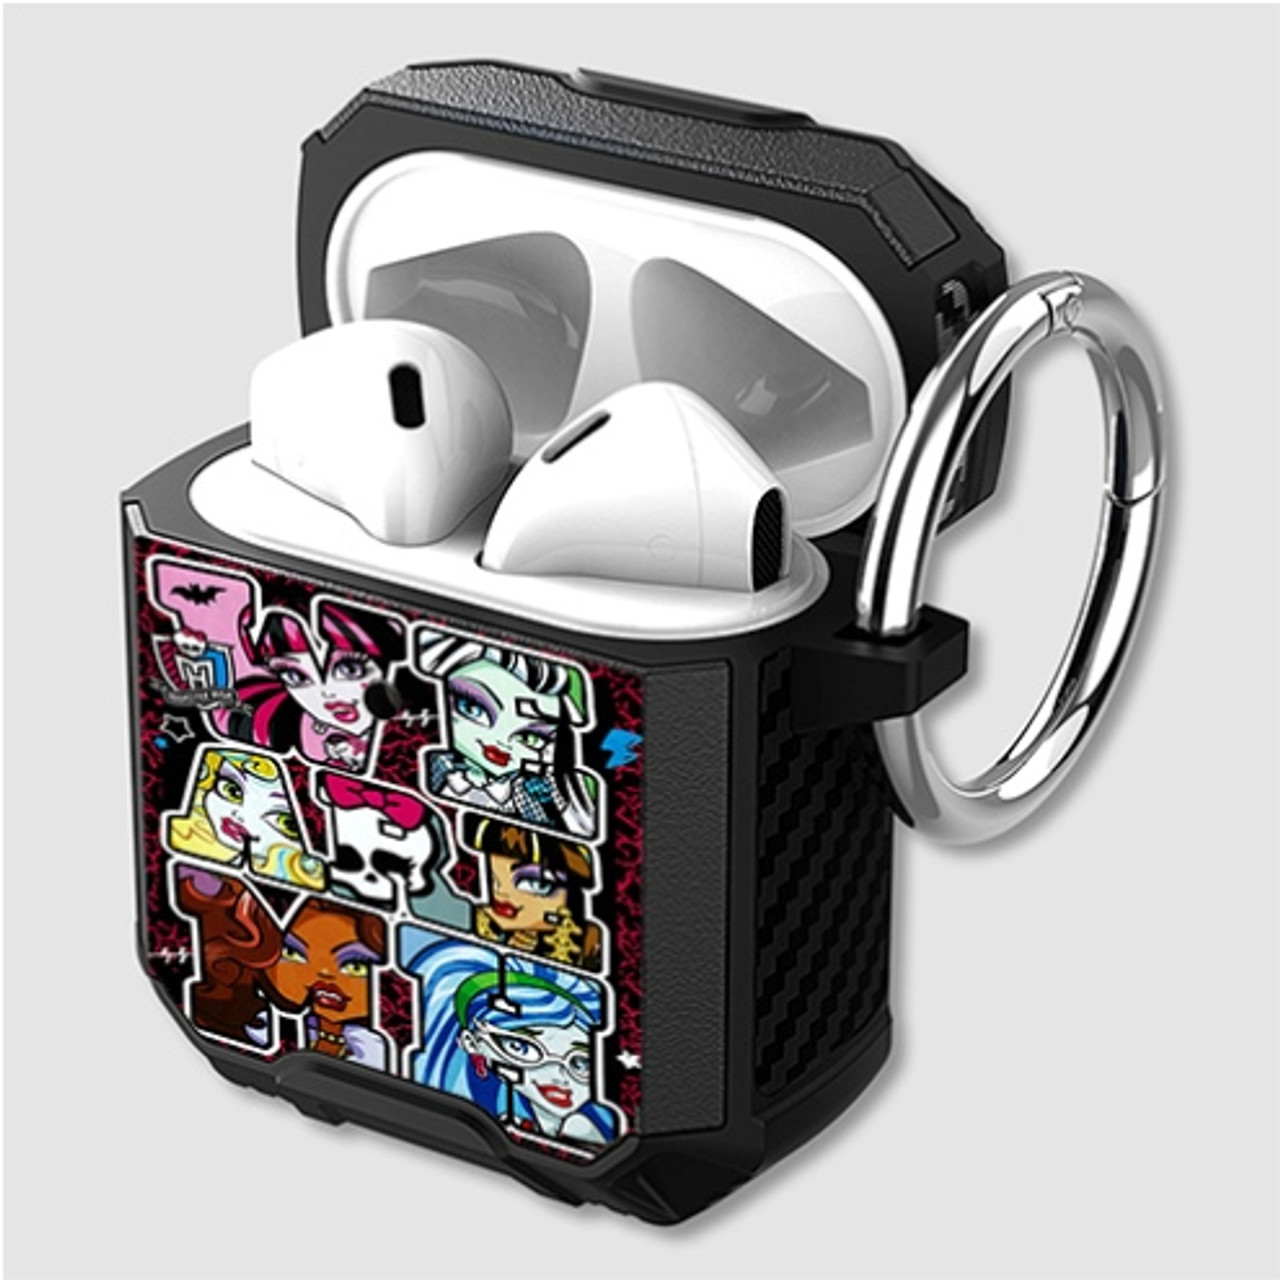 Large Airpods Pro Case